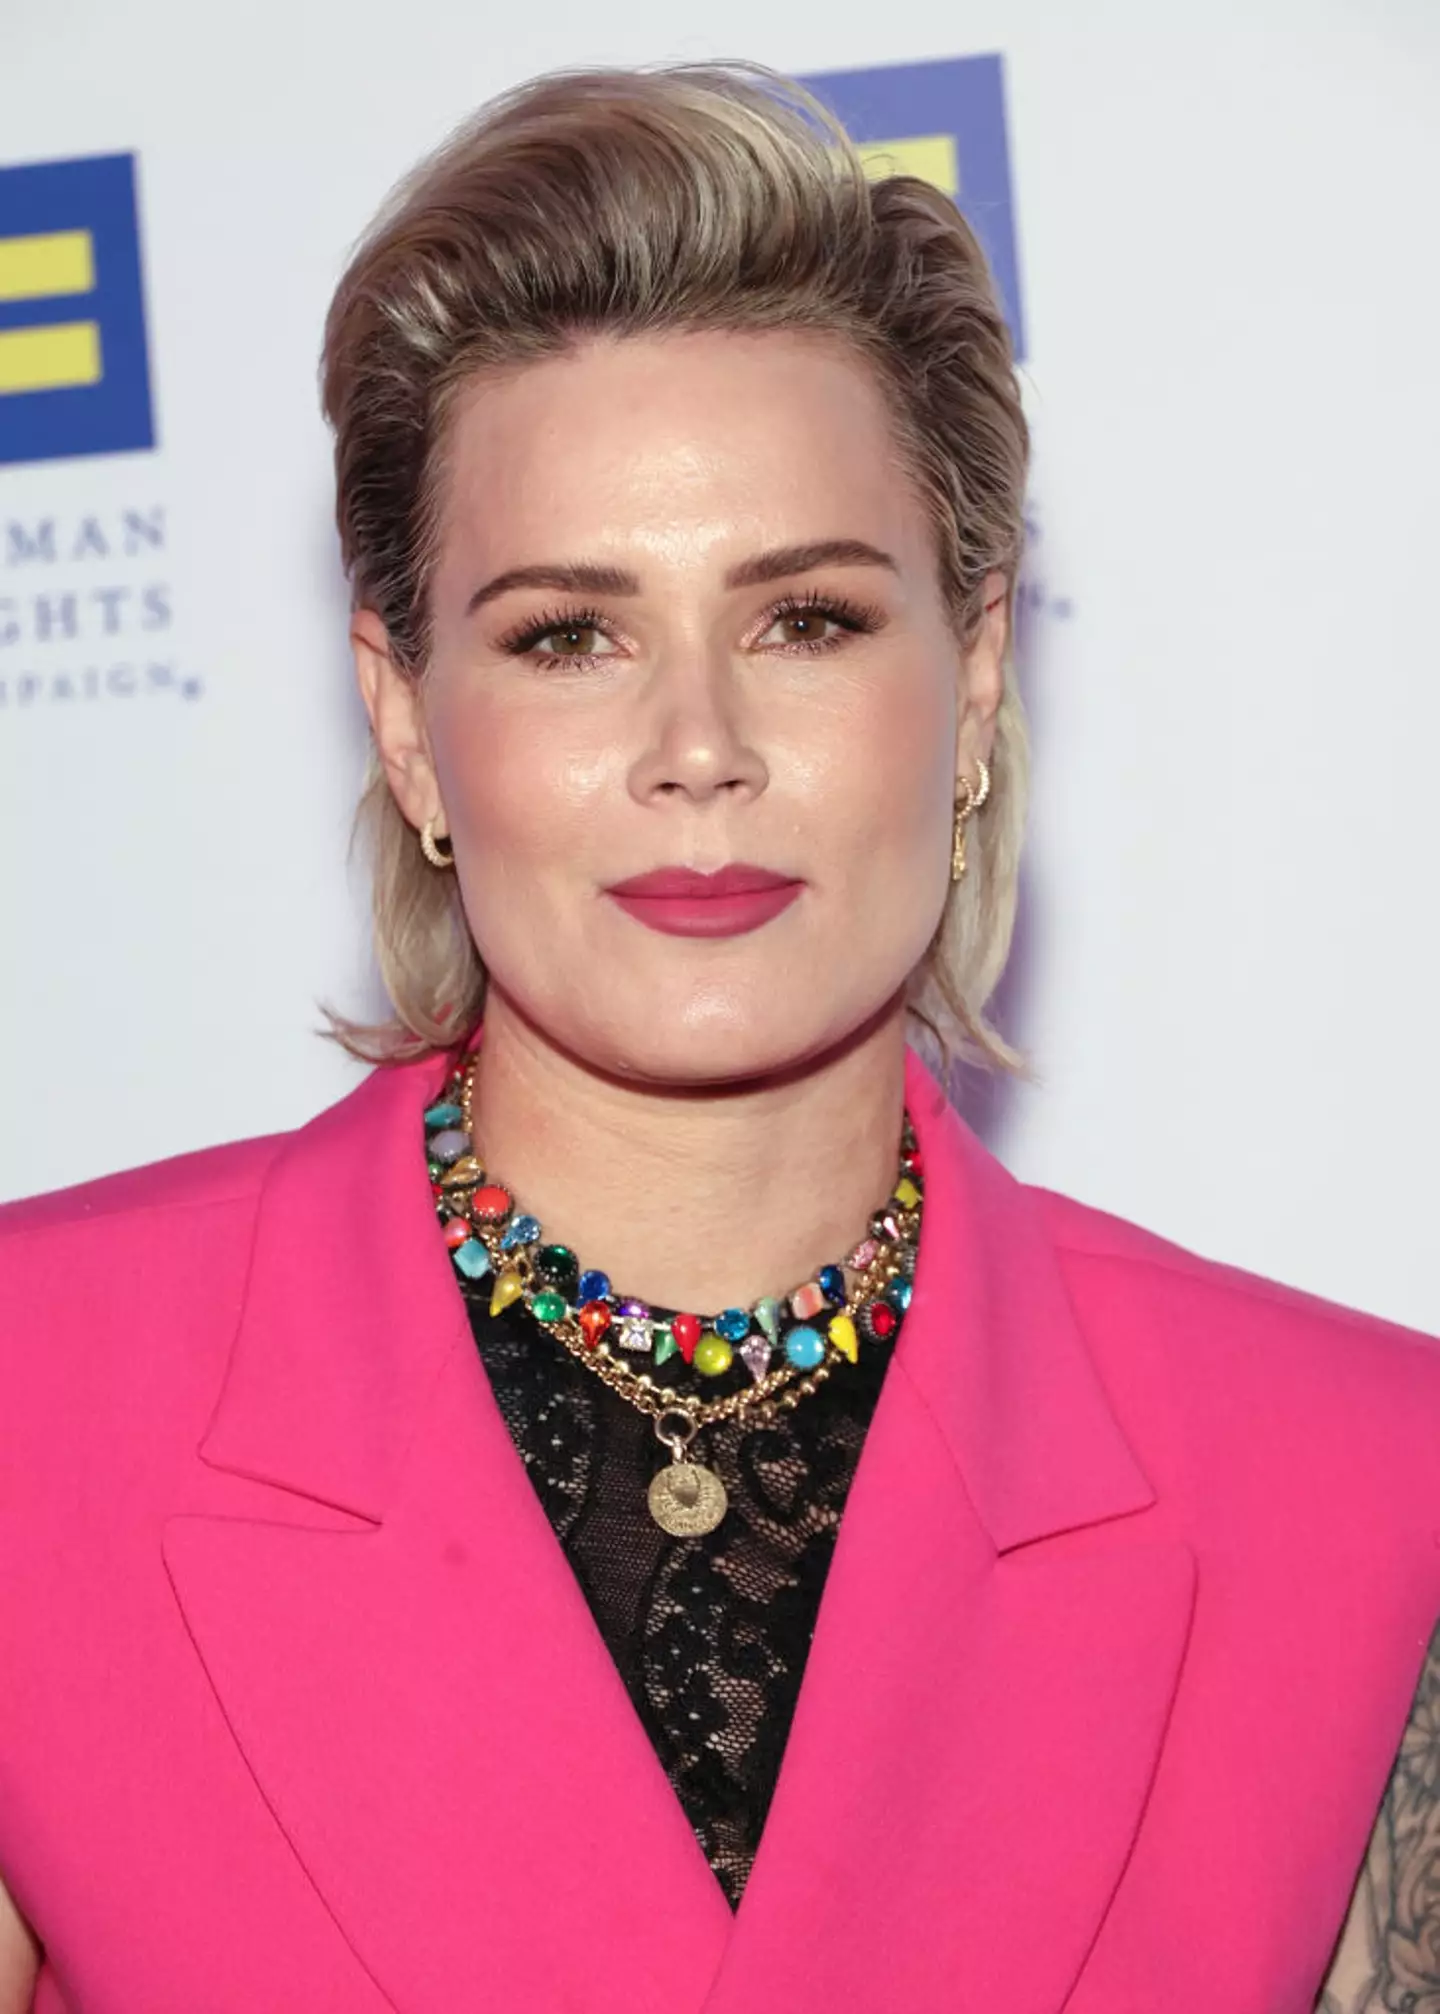 The actor confirmed her relationship with American soccer player, Ashlyn Harris. (Monica Schipper / Staff / Getty Images)